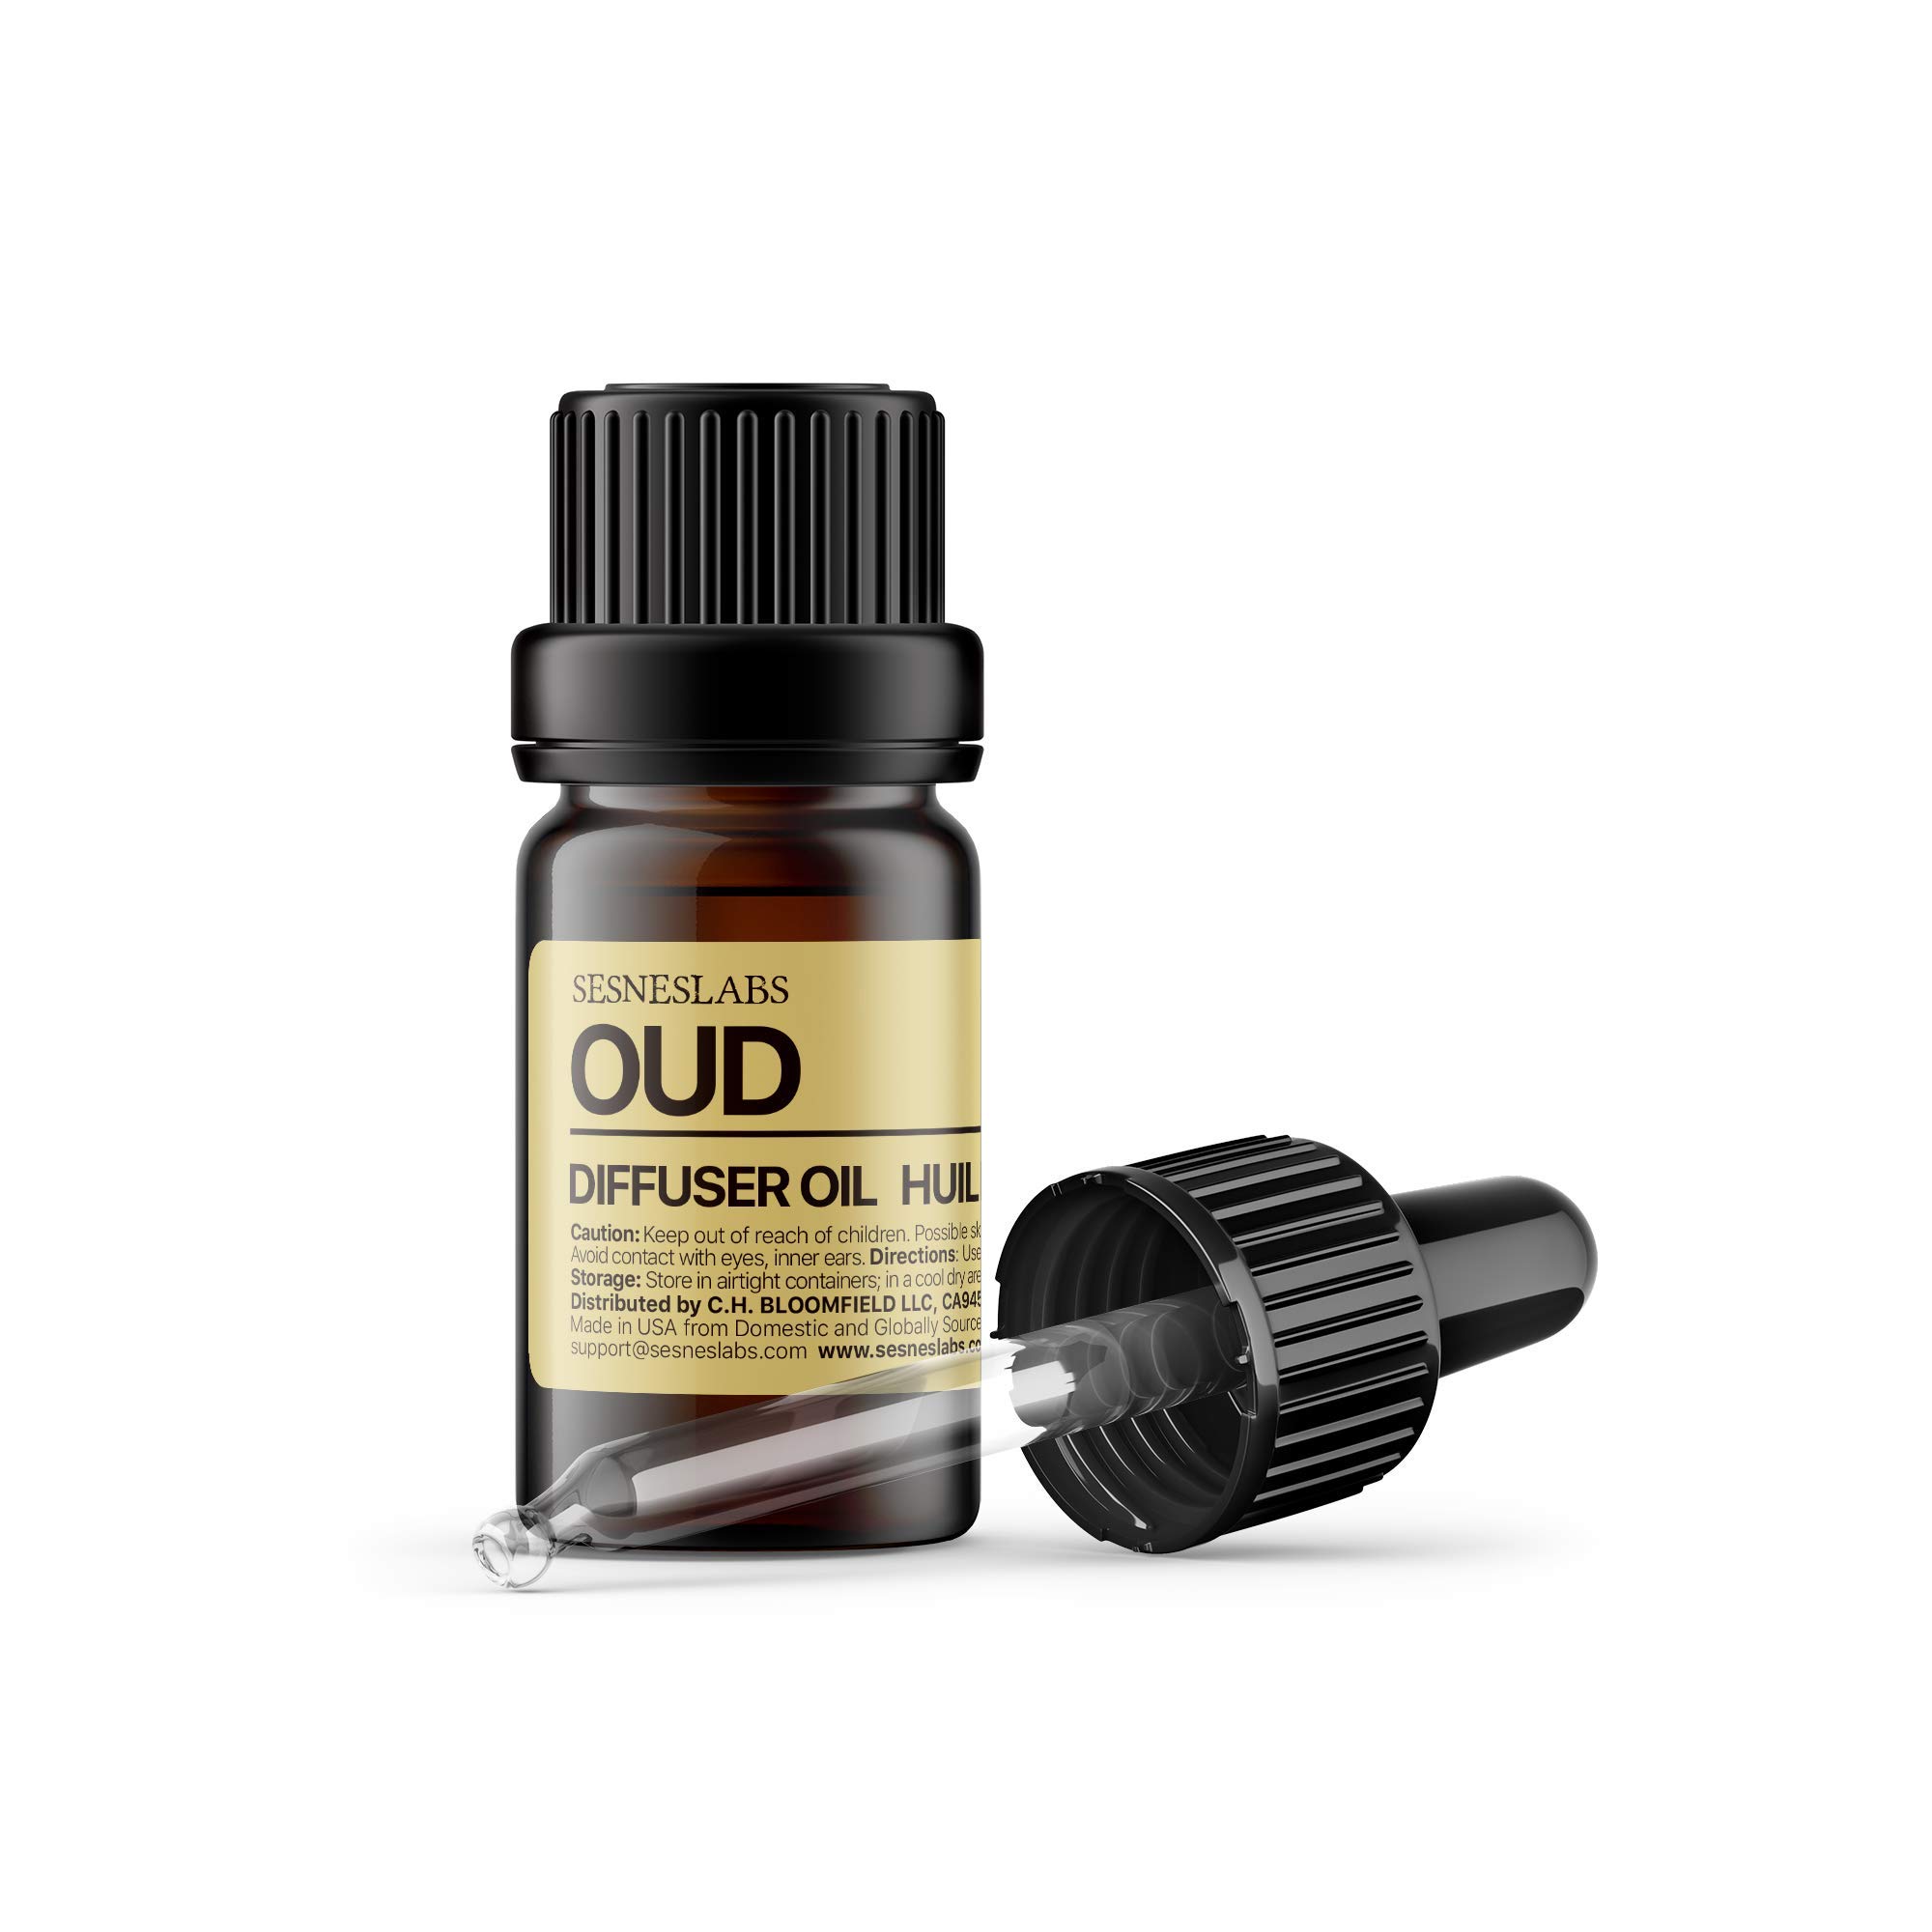 Oud Diffuser Oil, Niche Scent, Luxury Chinese Pepper, Rosewood, Cardamom,  Vetiver, Oud, Tonka Bean, Musk Essential